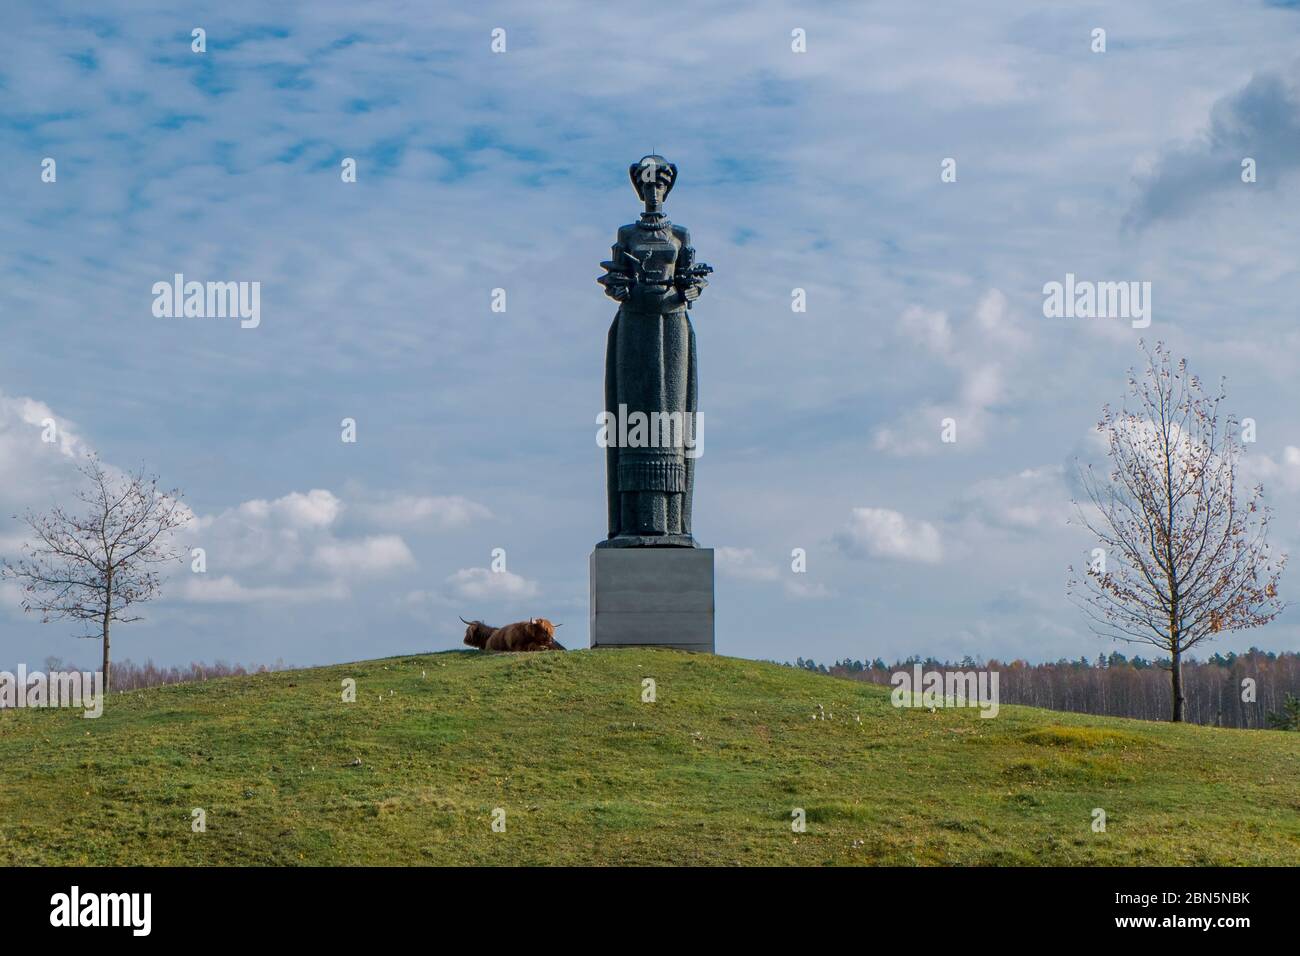 A huge bronze statue, perhaps Victory or Motherland, with a couple relaxing yaks. At Gruto Parkas near Druskininkai, Lithuania. Stock Photo